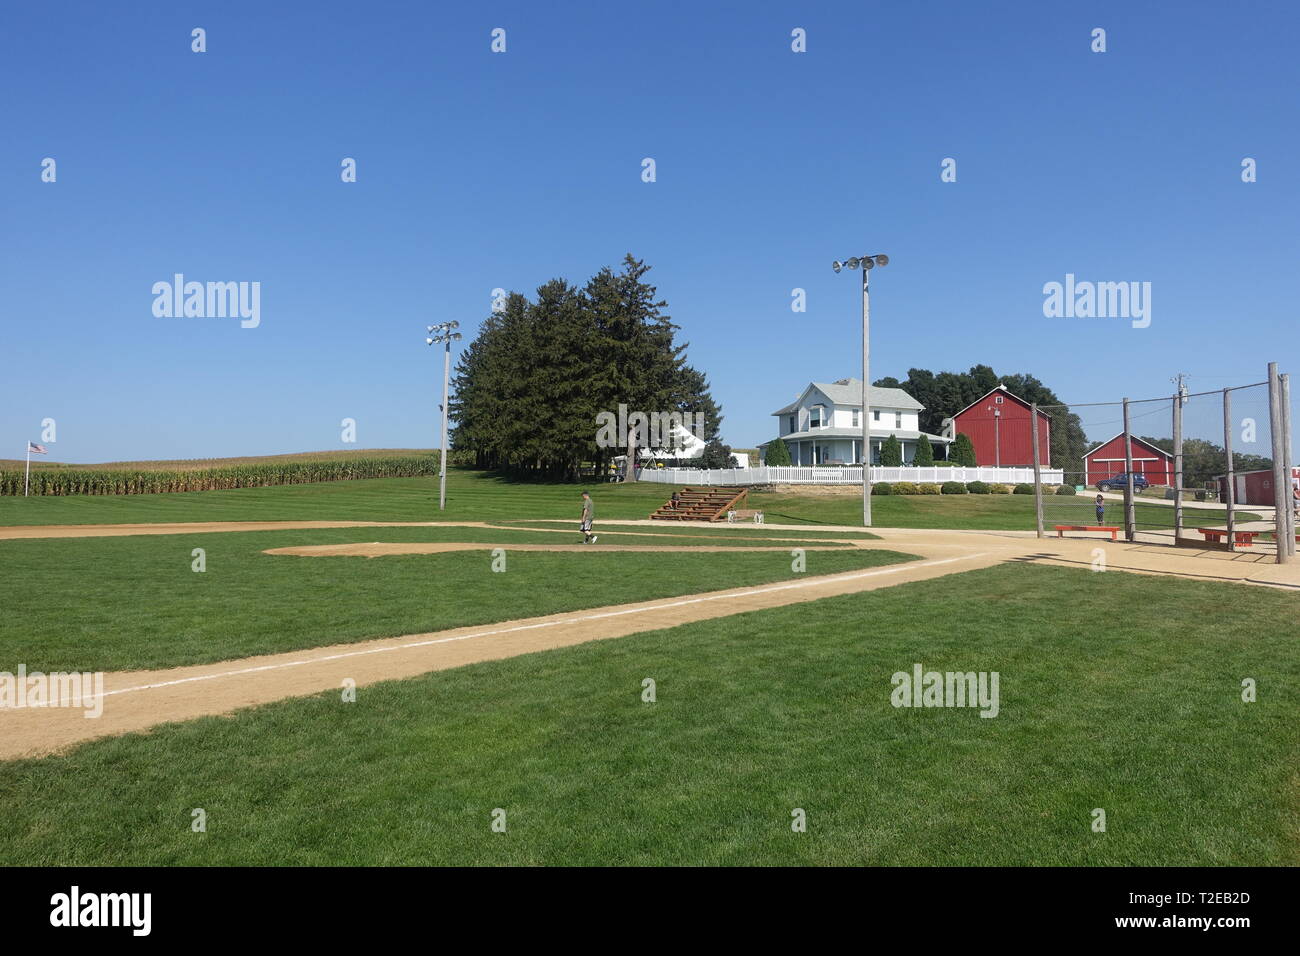 Field of Dreams Movie Site on X: Wallpaper Wednesday! Wallpaper below.  Keep a little piece of Field Of Dreams magic in your pocket at all times.  #Iowa #Baseball #MLB  / X